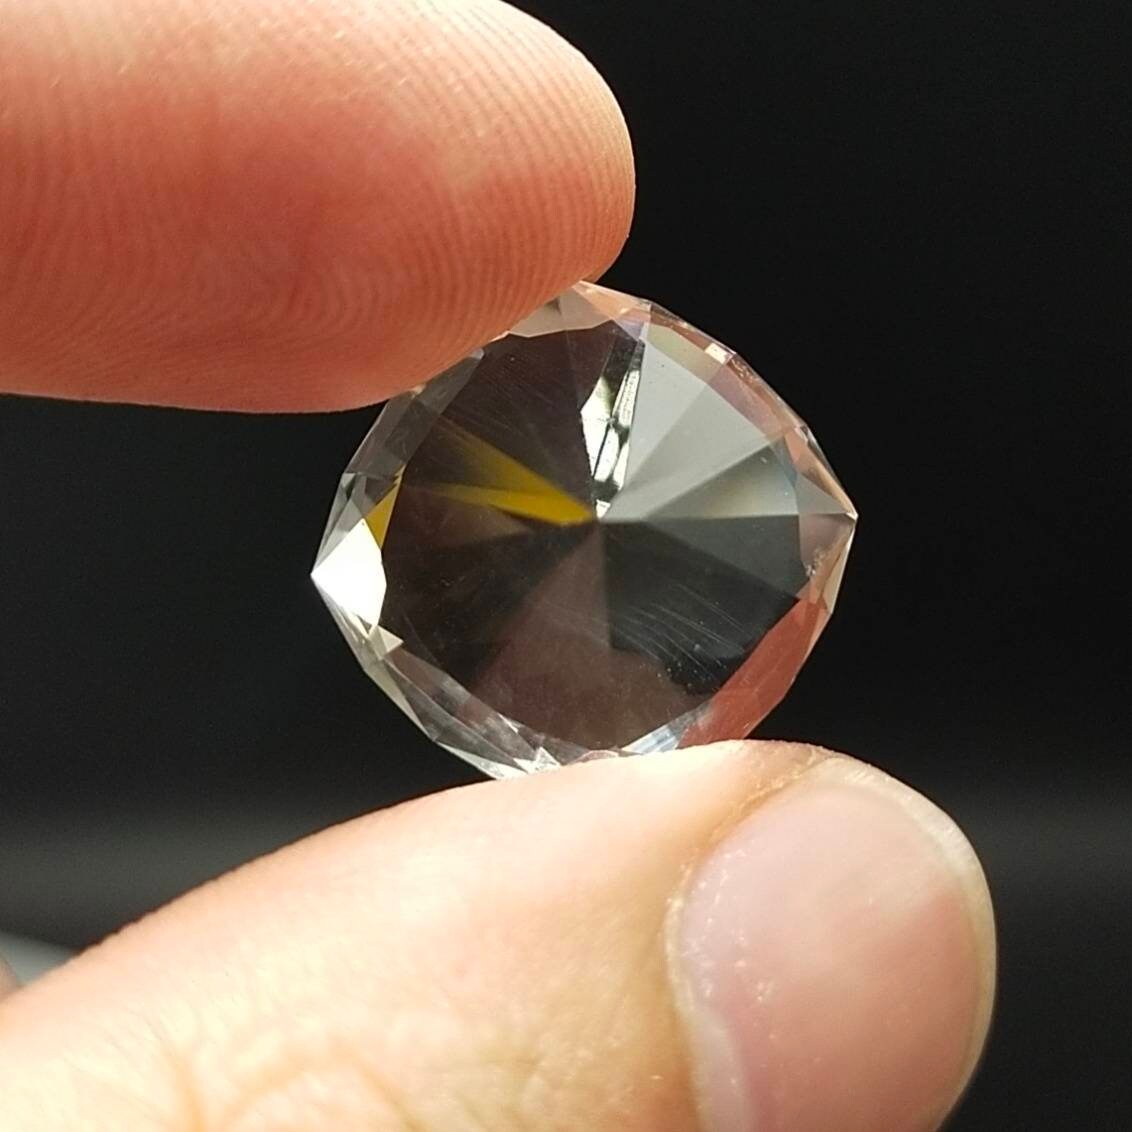 ARSAA GEMS AND MINERALSNatural fine quality beautiful 15 carats square cut shape good clarity Faceted Quartz gem - Premium  from ARSAA GEMS AND MINERALS - Just $15.00! Shop now at ARSAA GEMS AND MINERALS